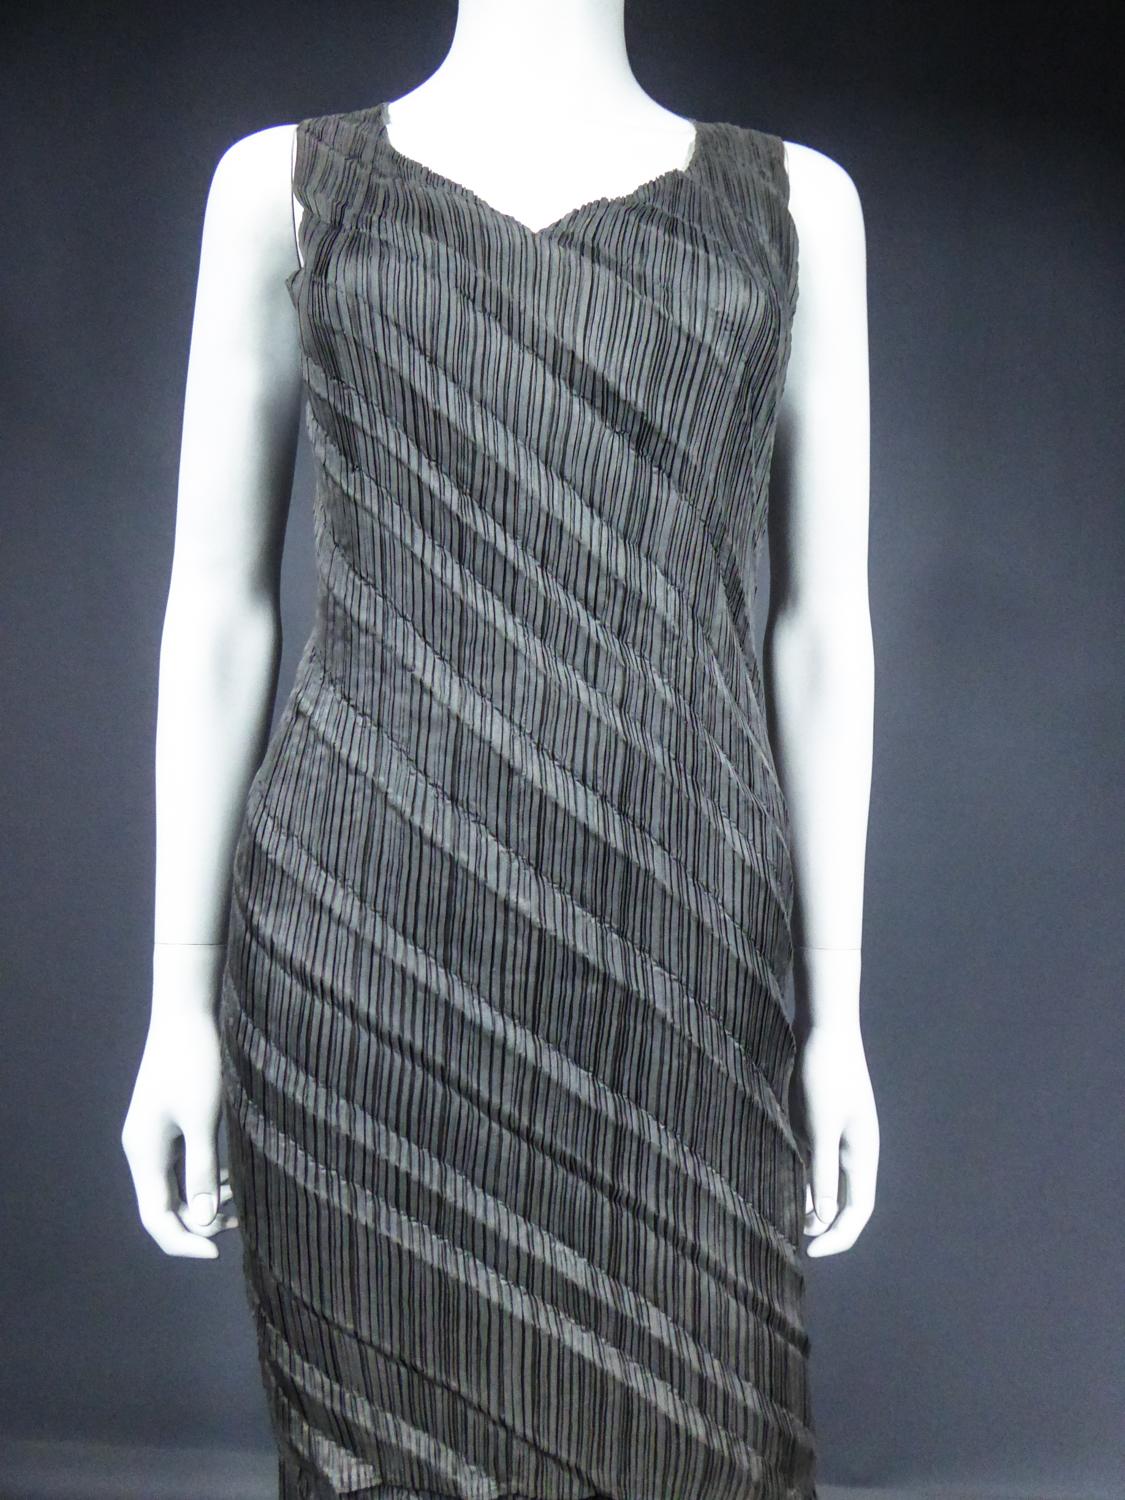 Early 1990
Japan

An Issey Miyaké top and skirt in charcoal grey pleated and goffered polyester from the early 1990's. Work of goffered pleats in oblique diagonal for this set with a straight and skin-tighted cut. Sleveless top with a